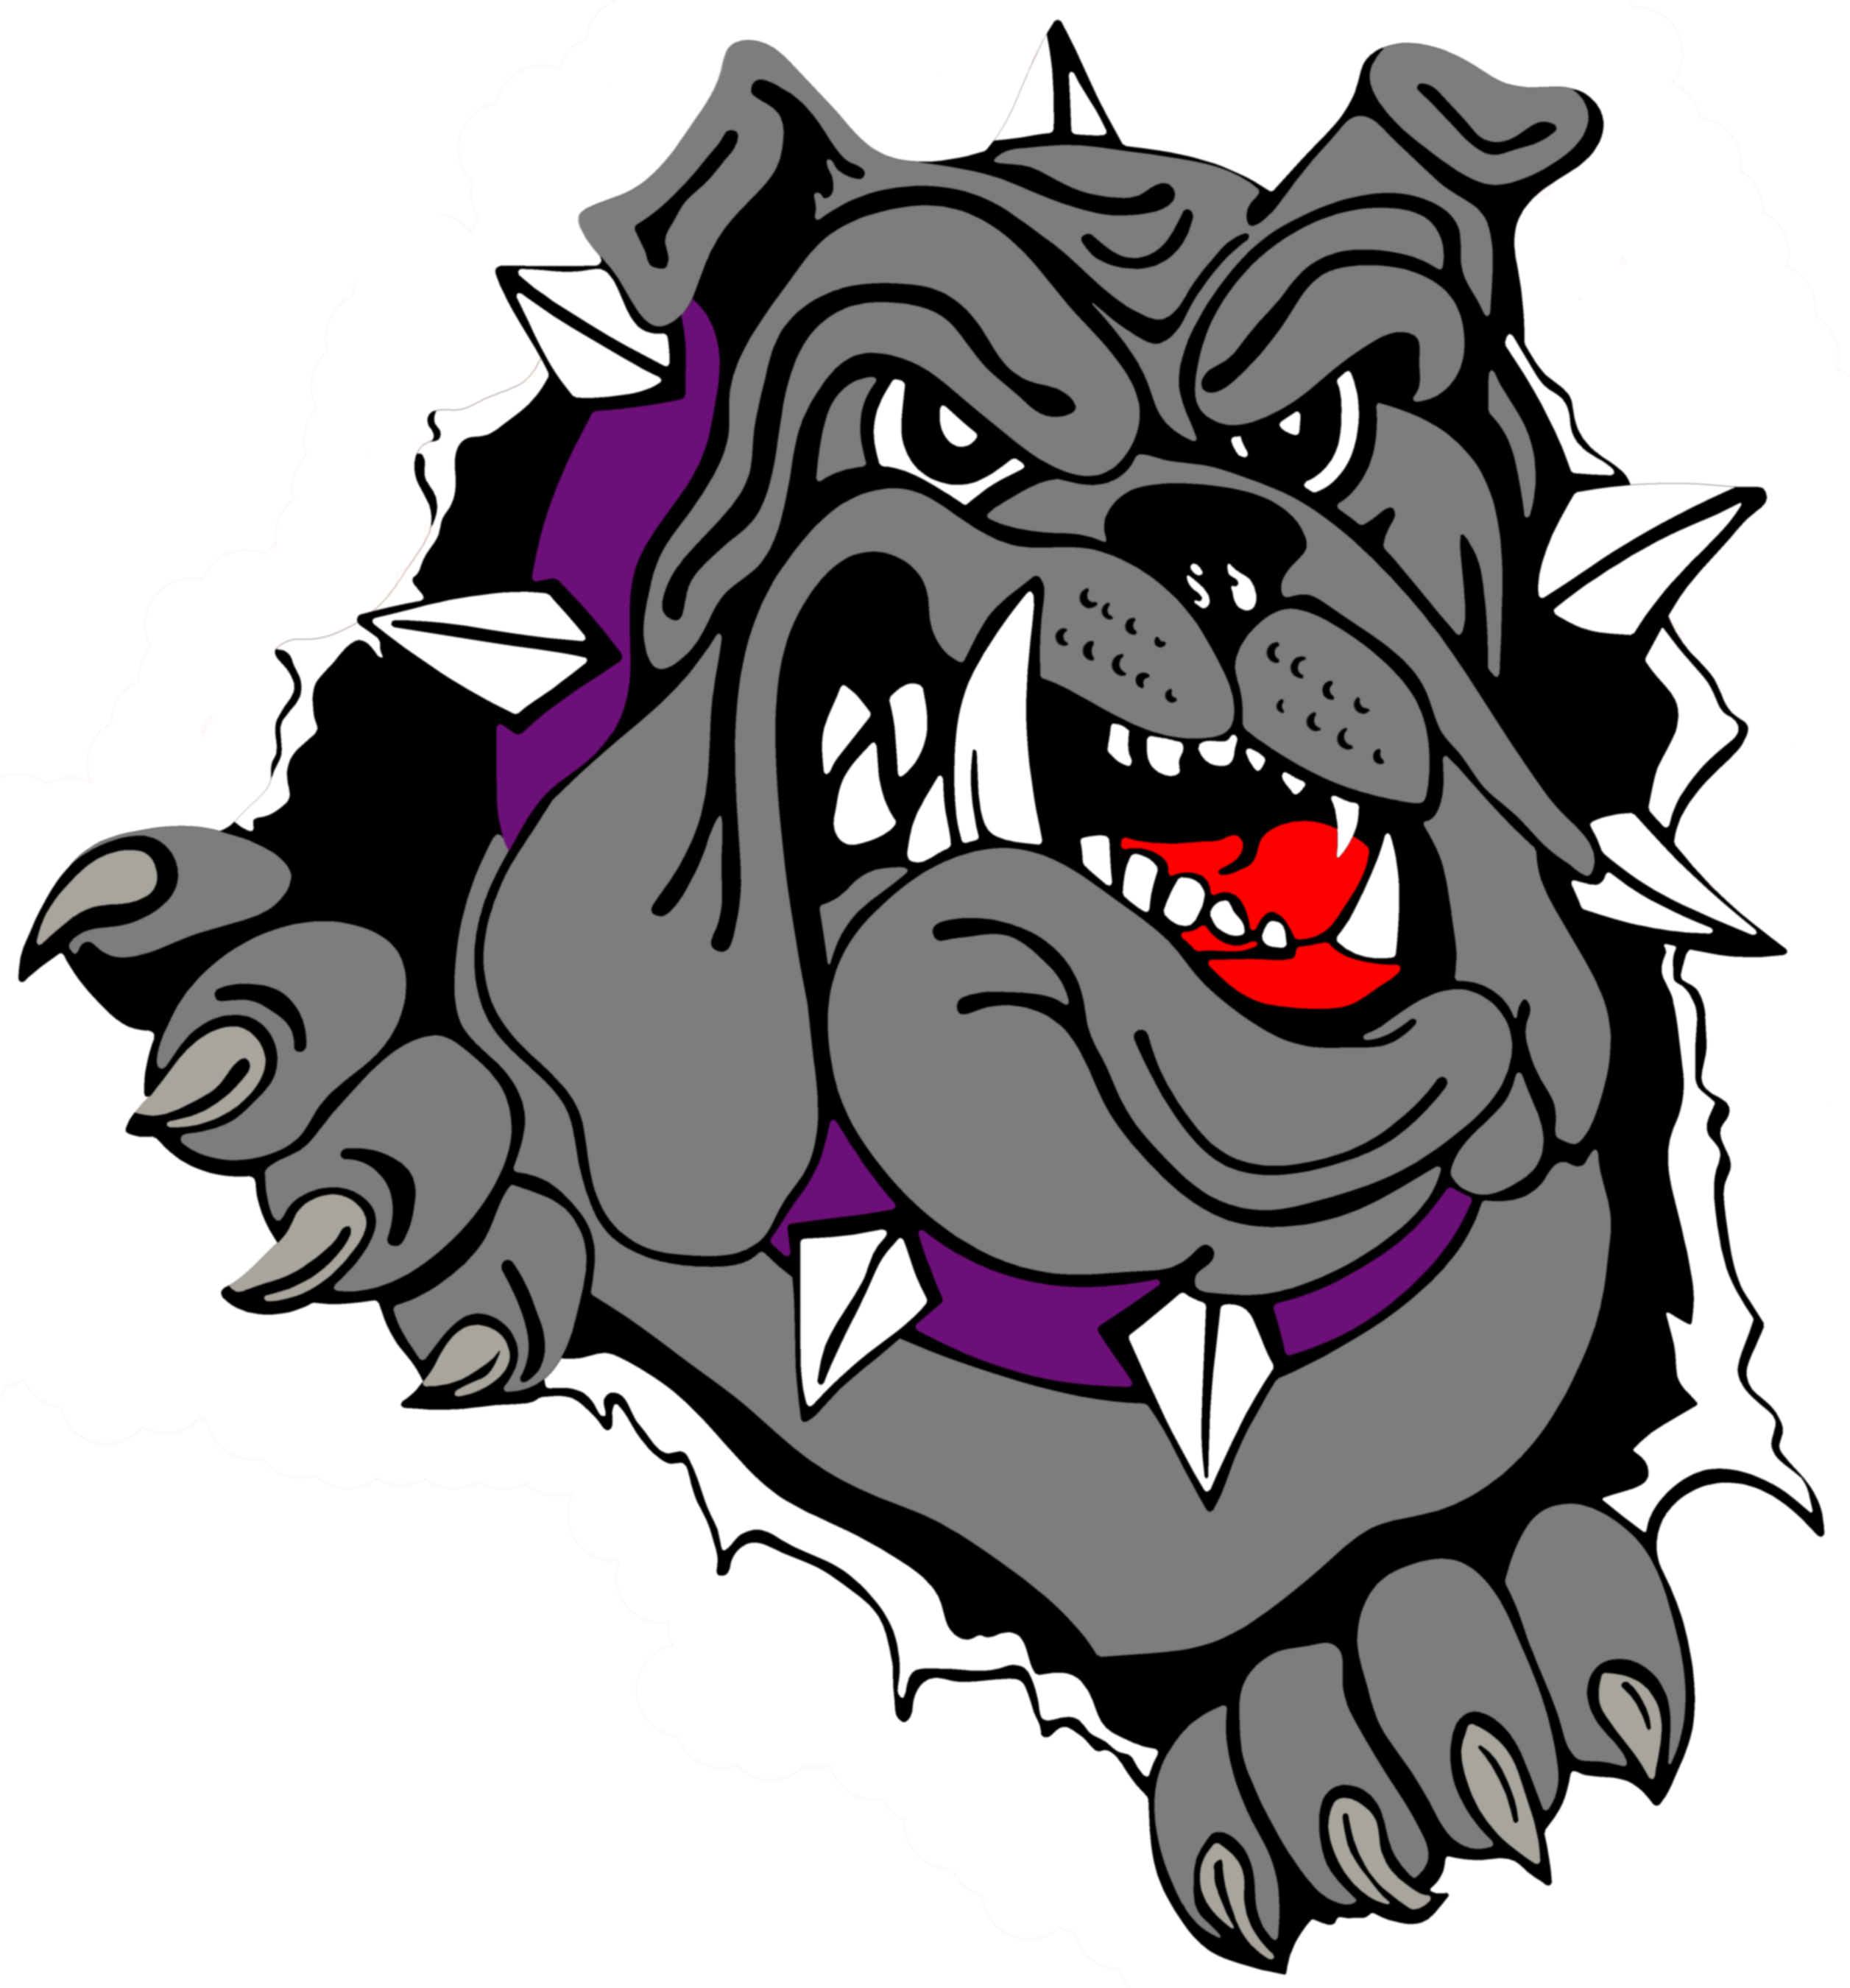 Gorilla clipart mad. Does the bulldog with